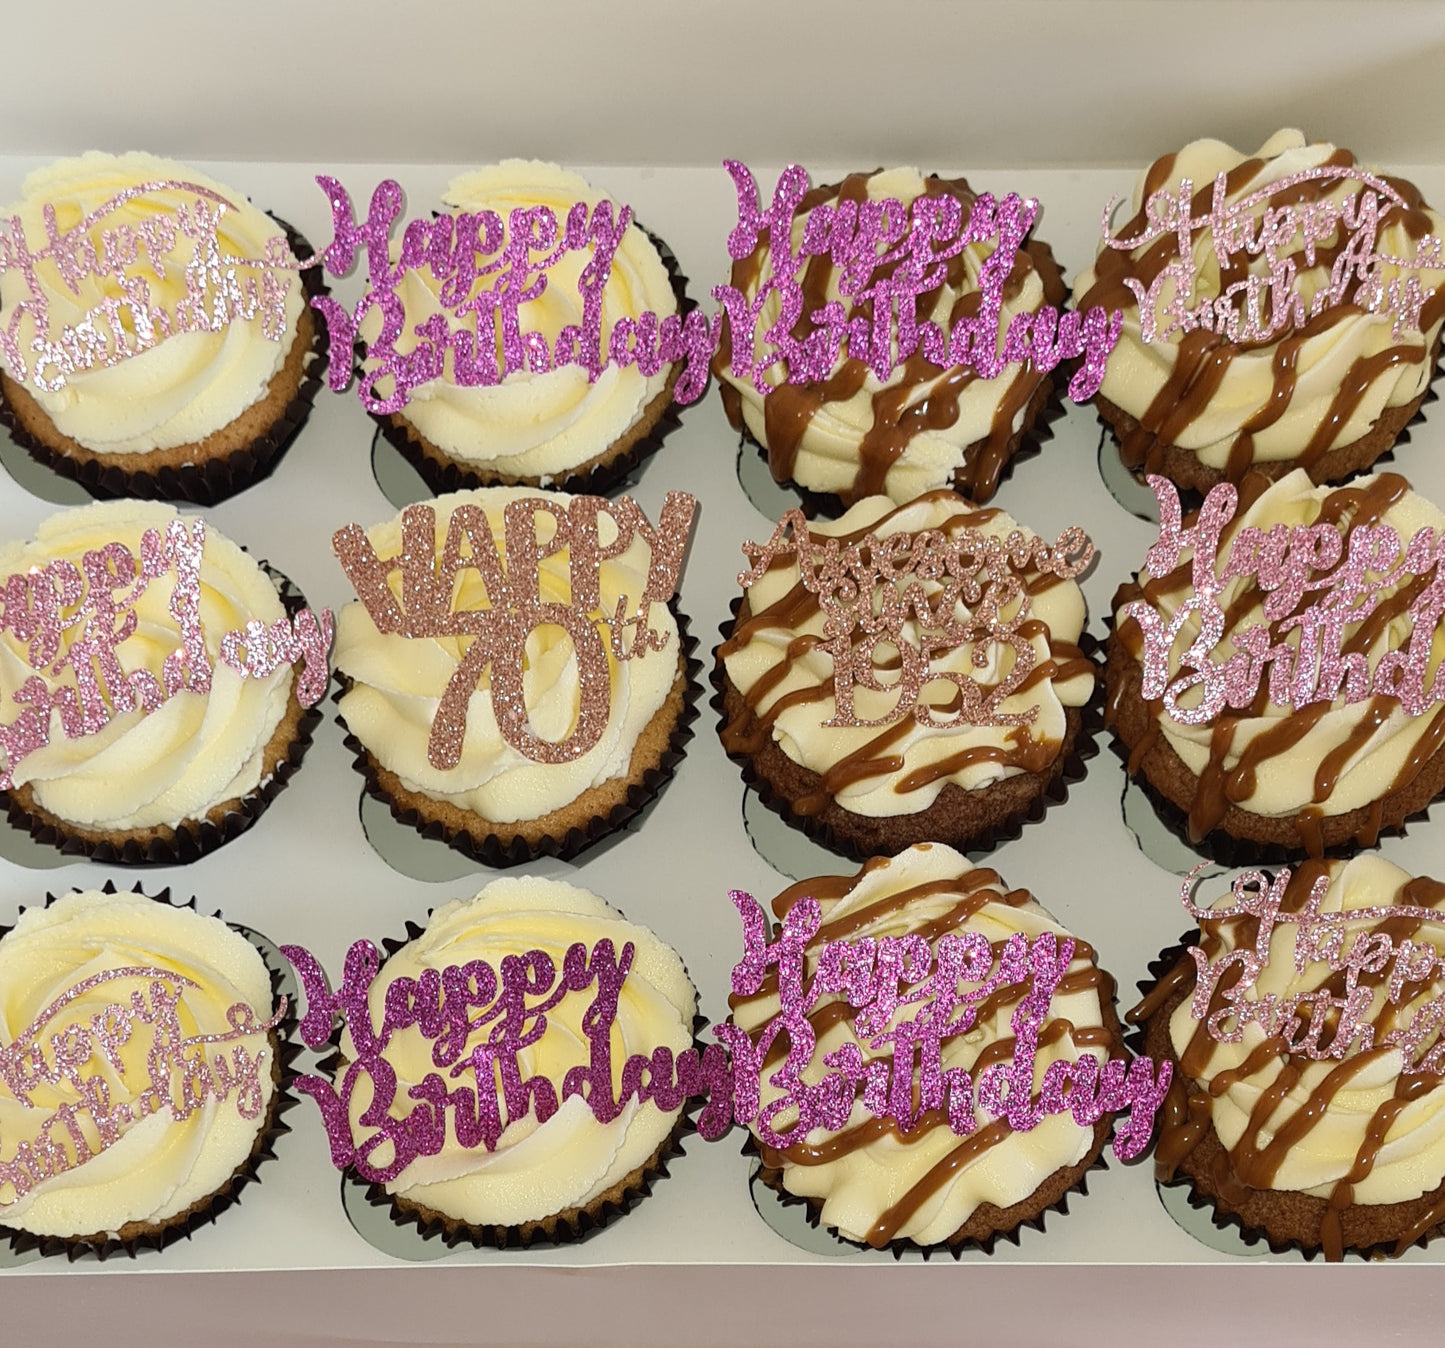 Happy birthday cupcakes for a very lucky 70th party!